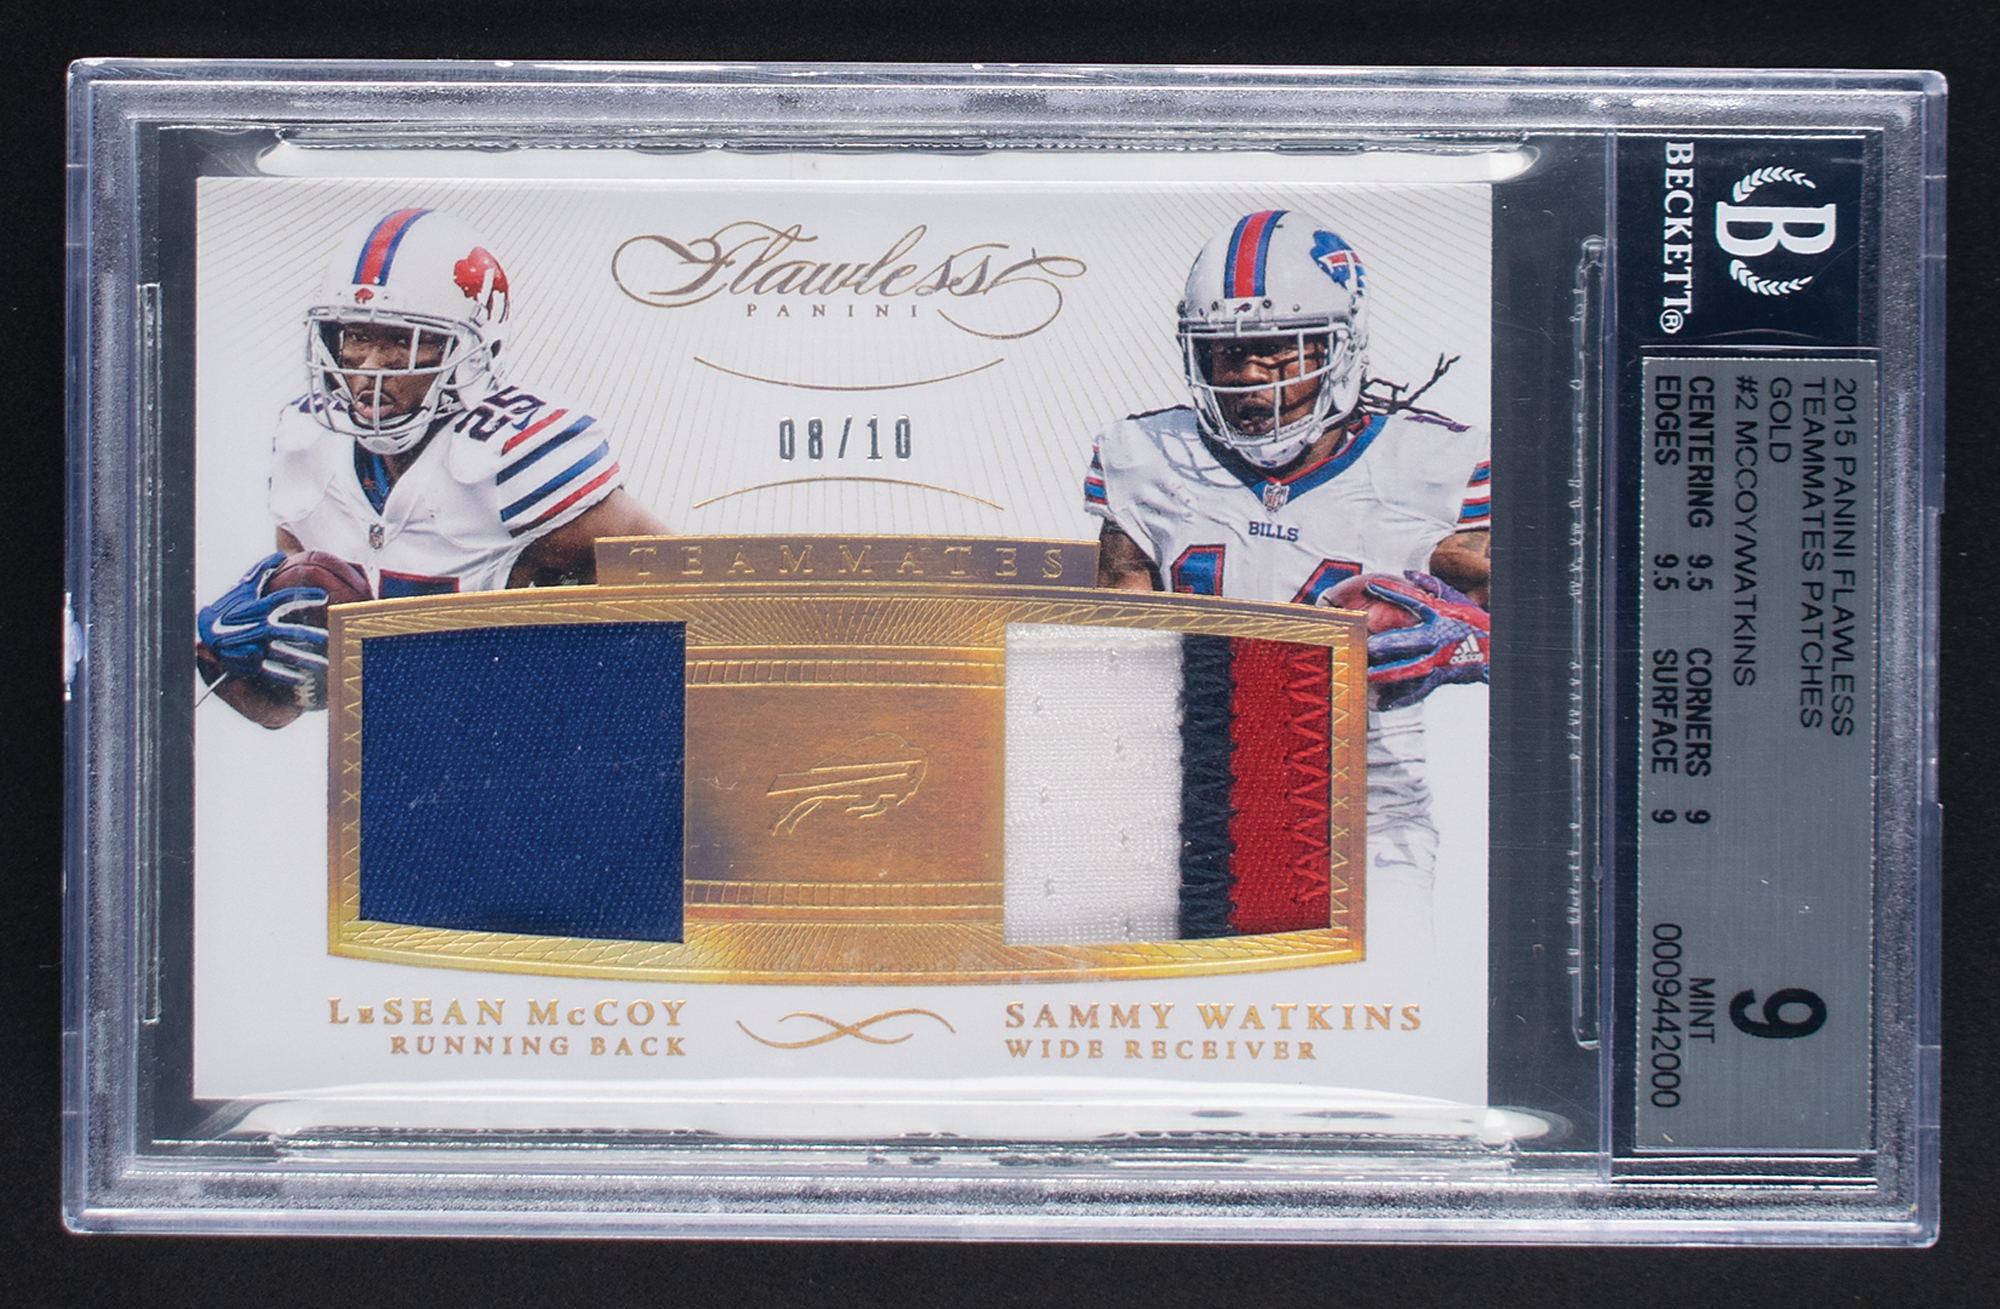 Lot #1015 2015 Panini Flawless Teammates Patches Gold LeSean McCoy/Sammy Watkins Patches (8/10) BGS MINT 9